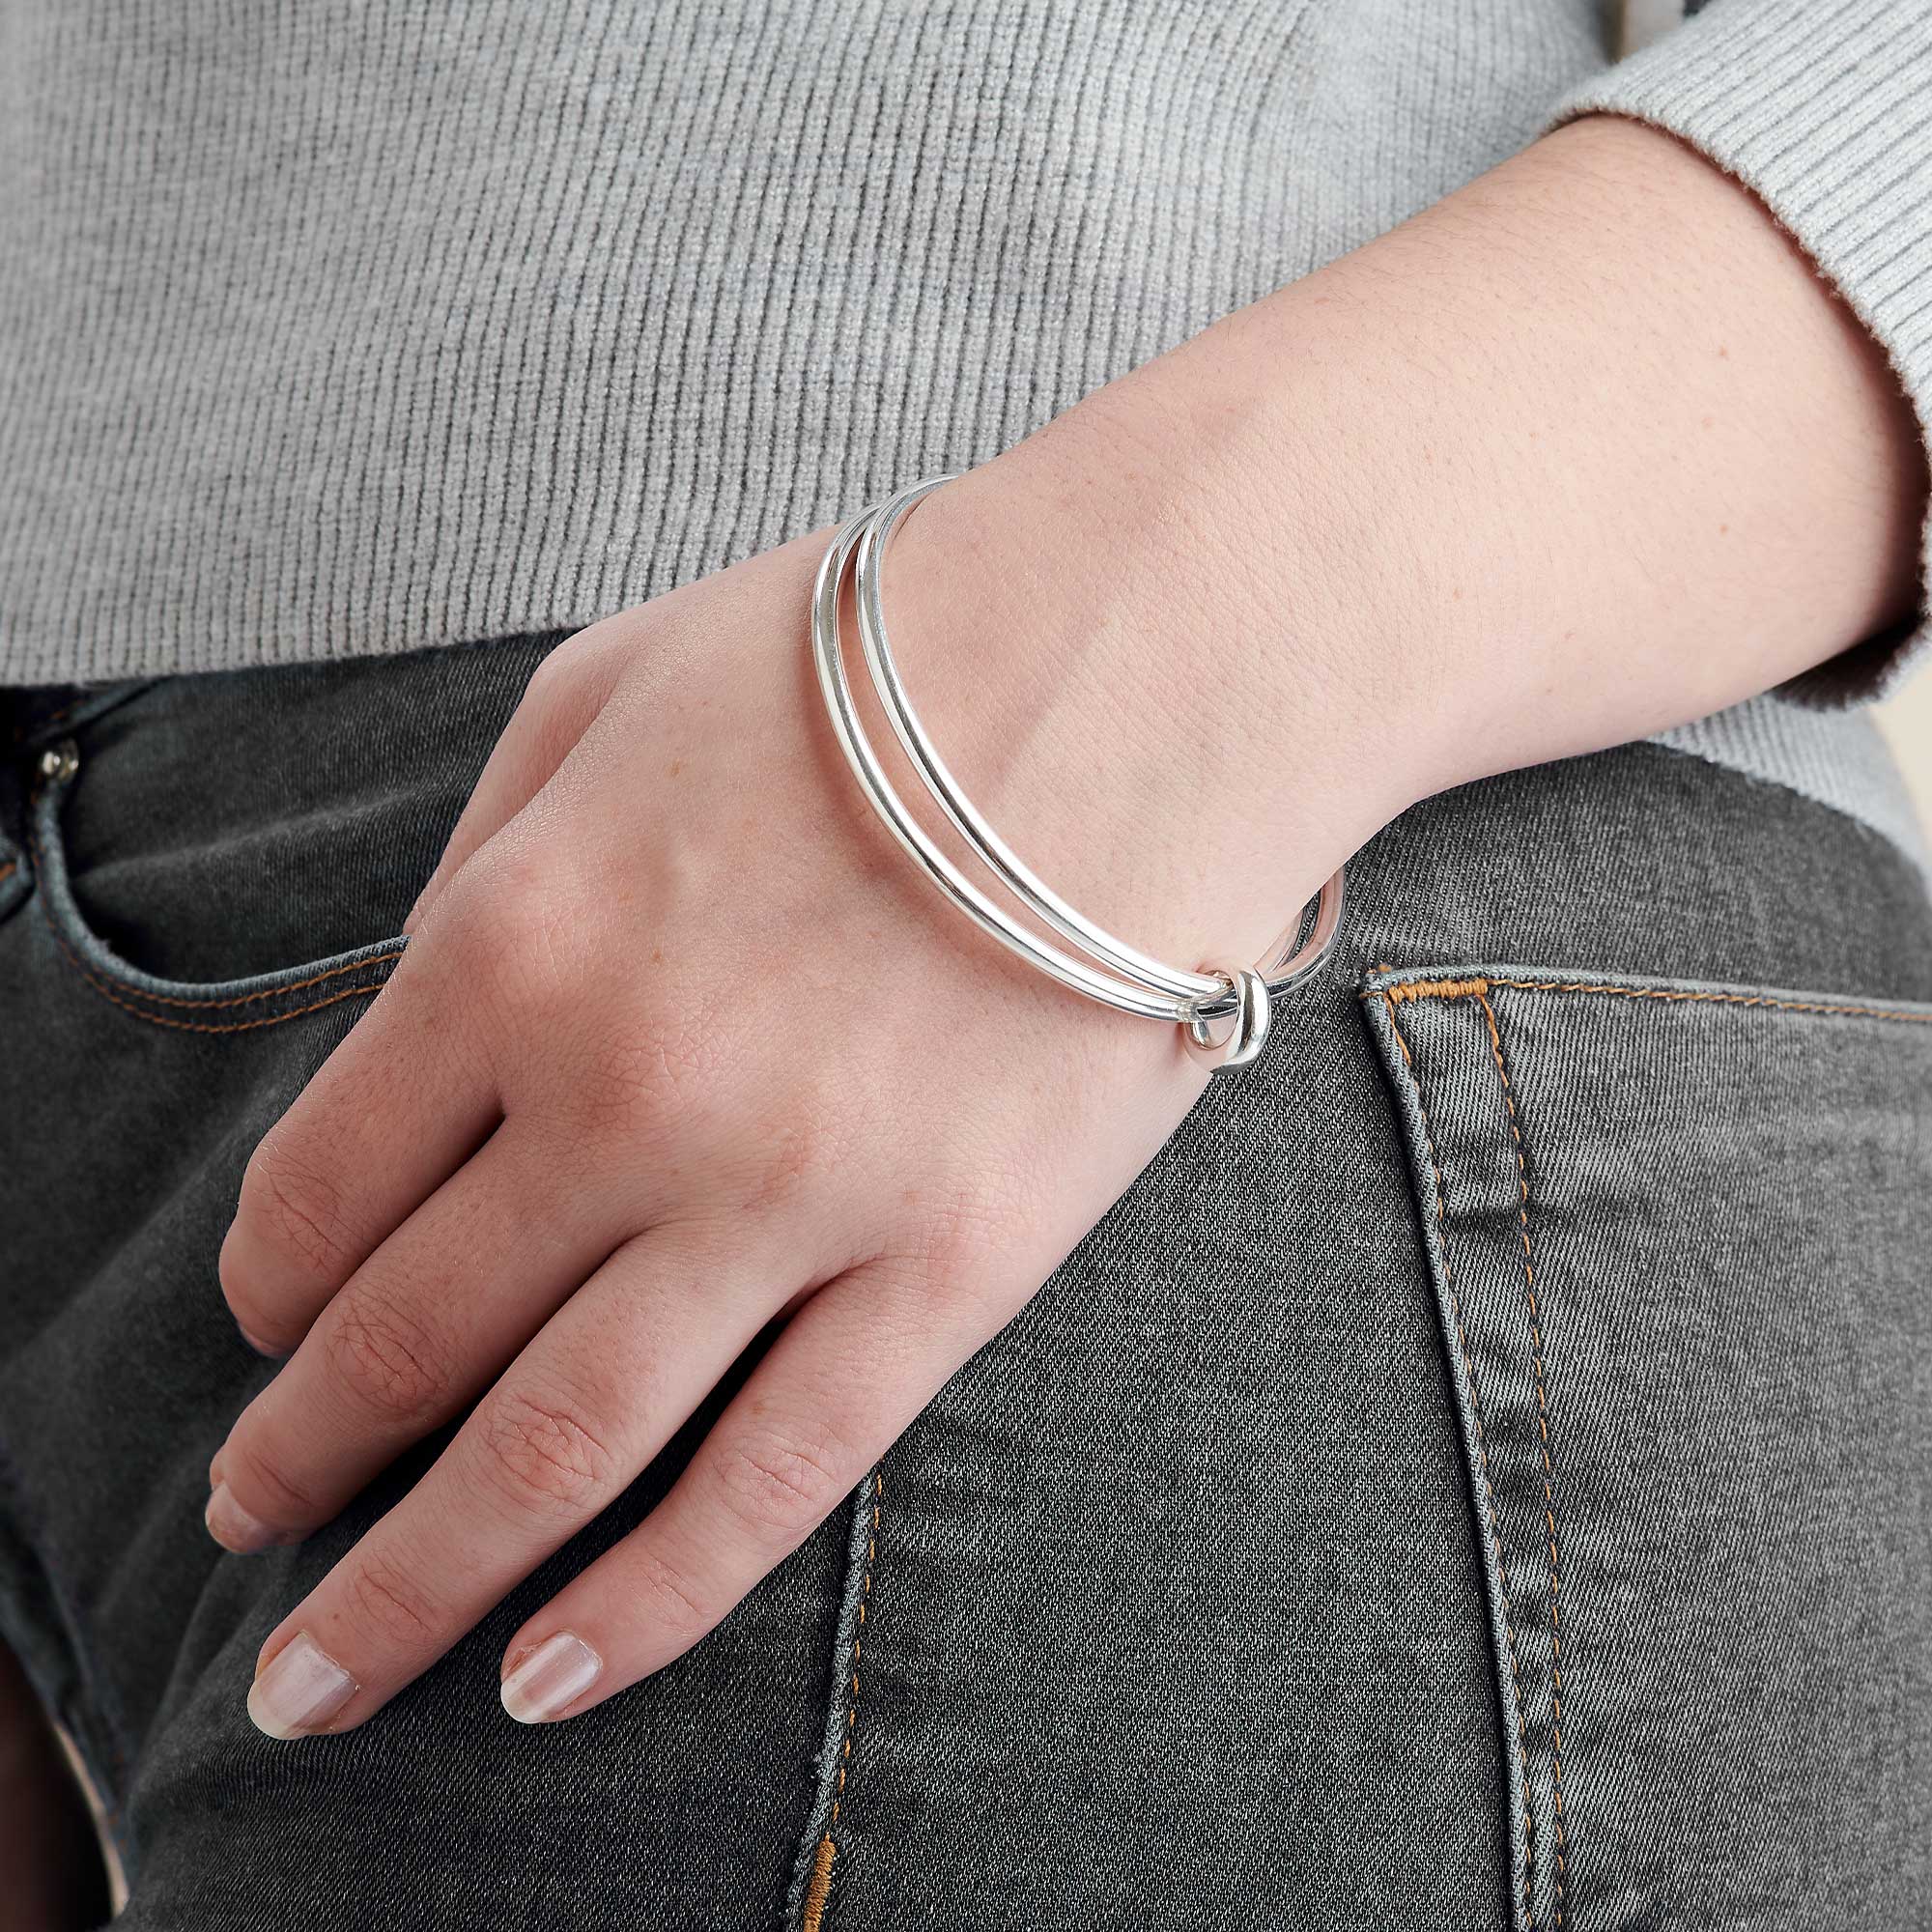 Two solid silver bangles joined in eternity by an asymmetrical Eclipse loop - a gorgeous designer made bangle for women.